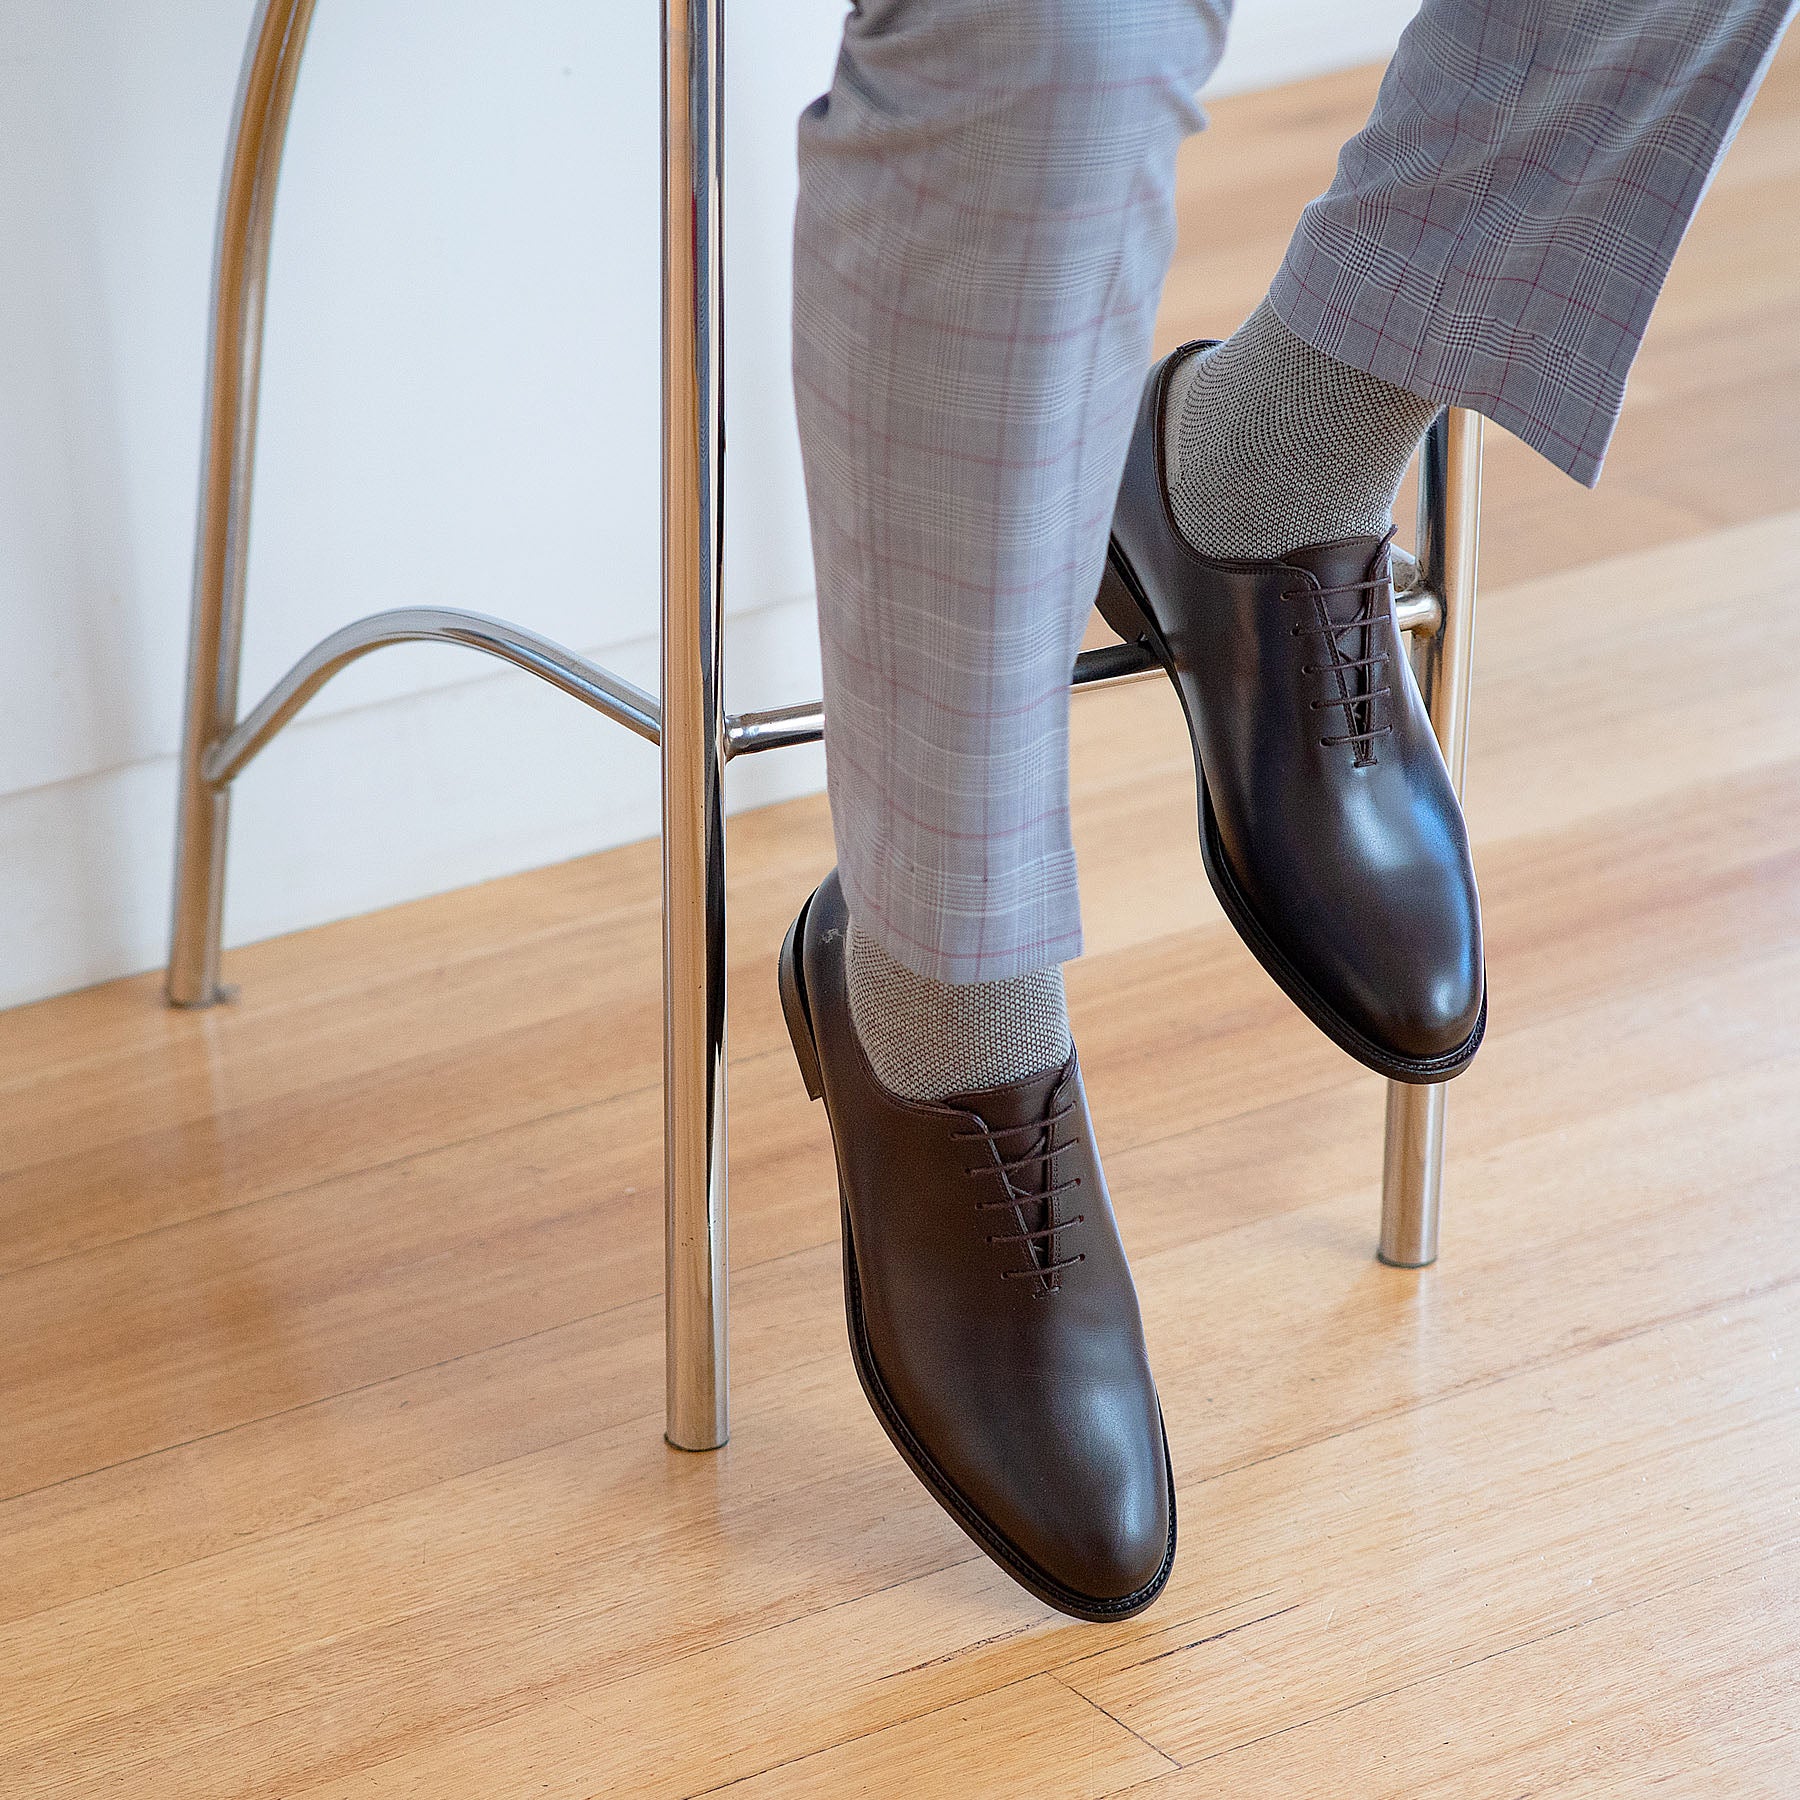 Brown oxford shoes paired with tailored suits and stripped socks.